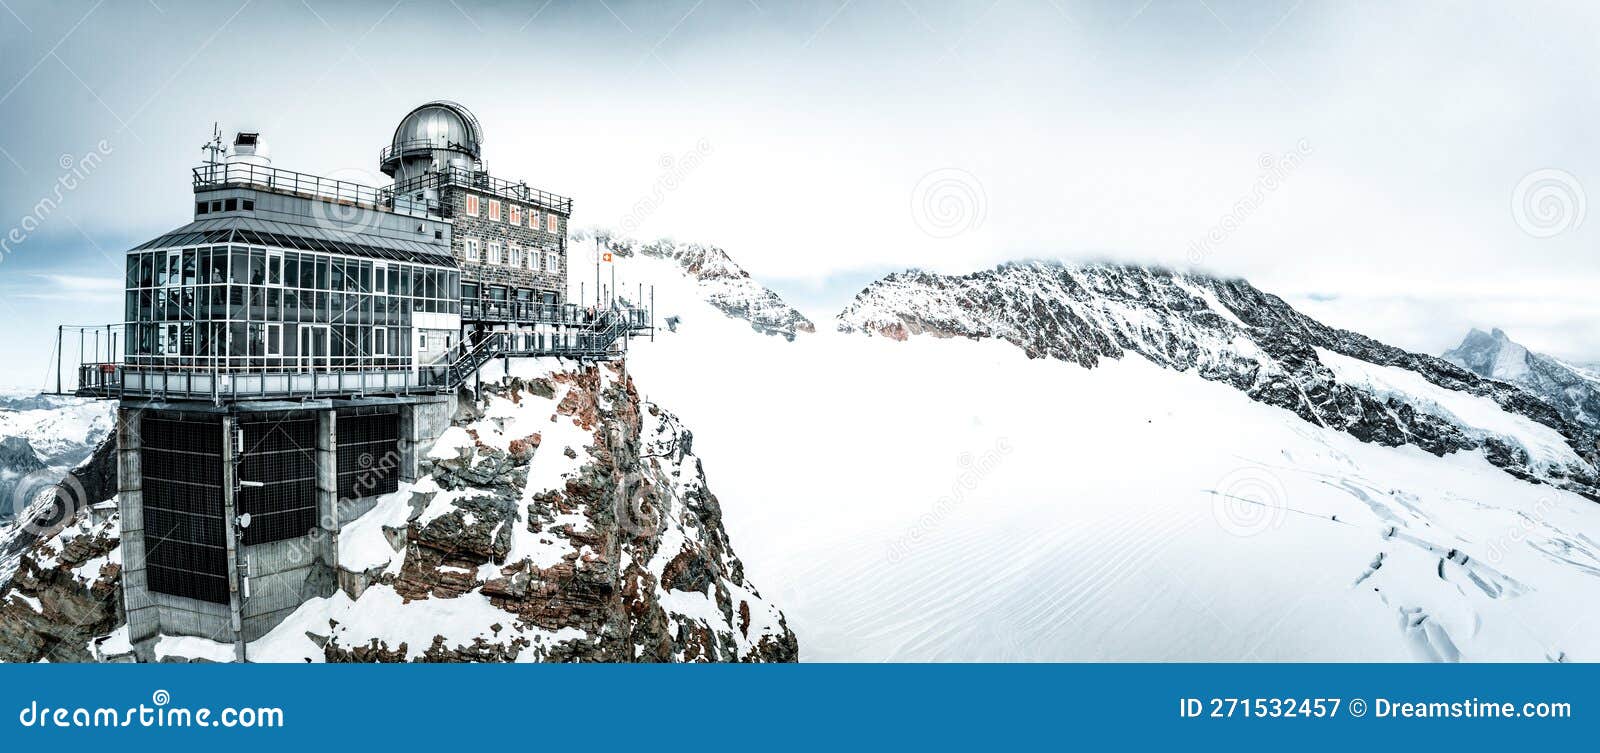 aerial panorama view of the sphinx observatory on jungfraujoch - top of europe